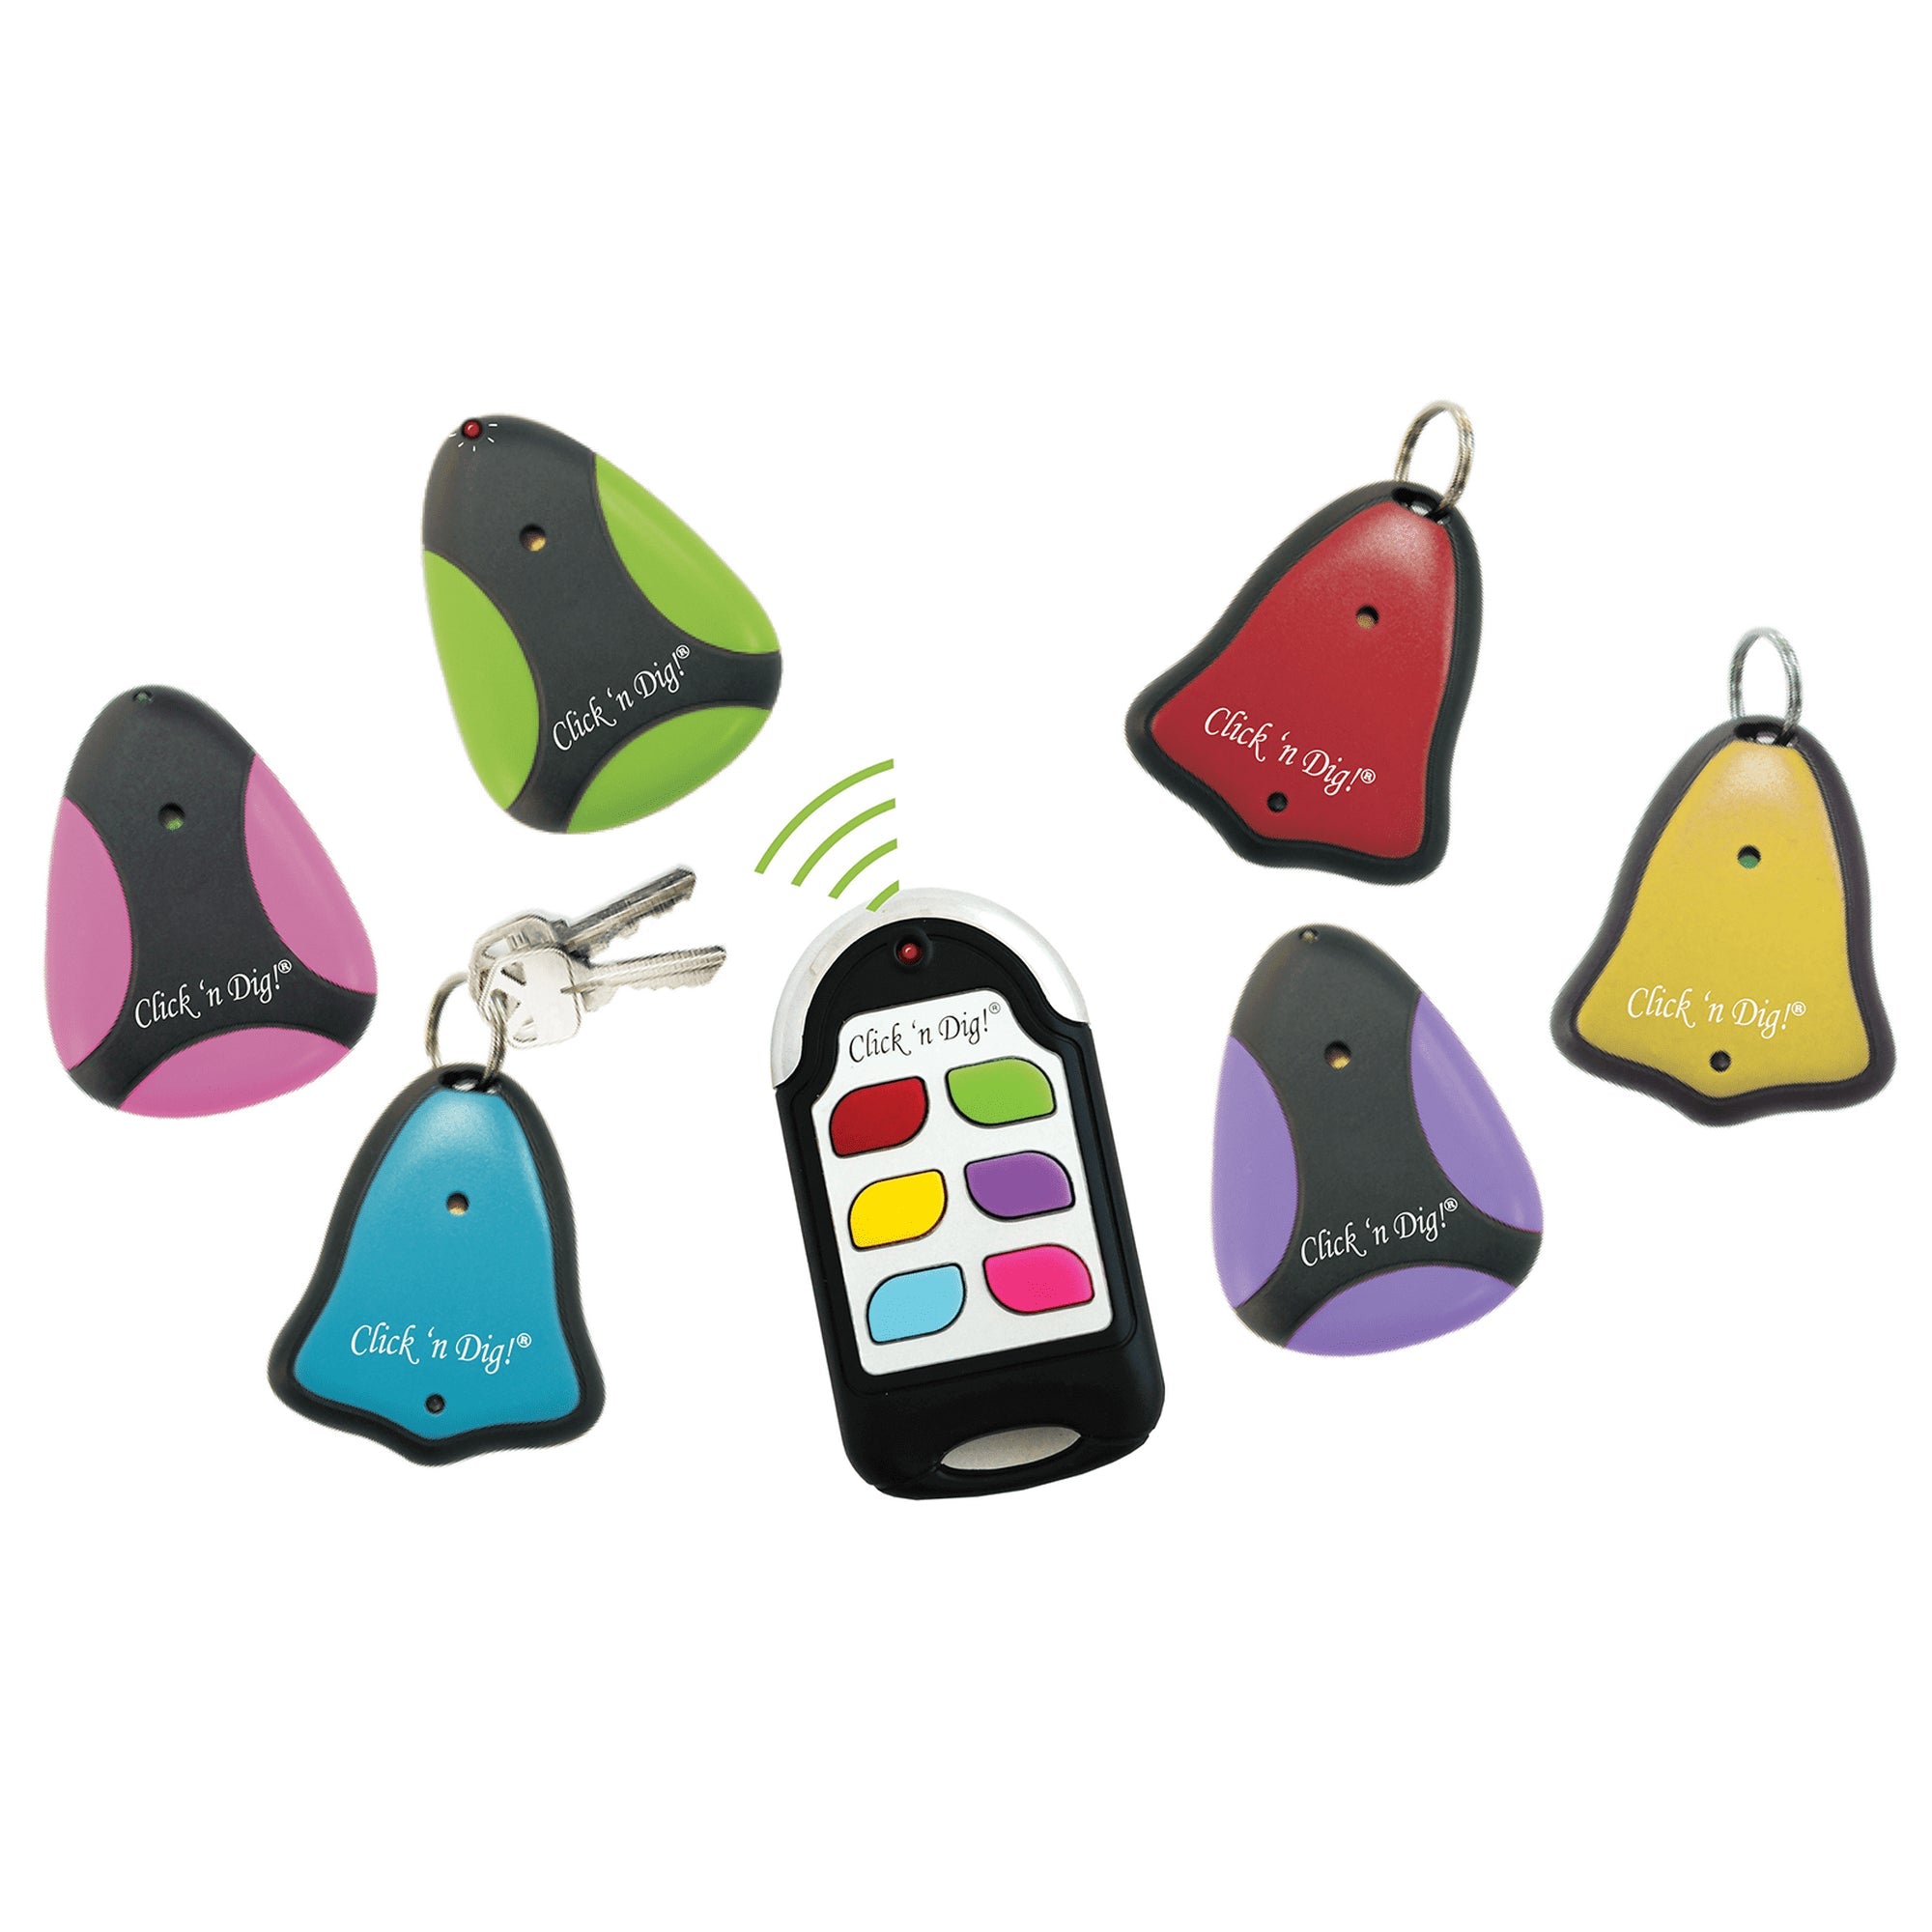 ClicknDig Click 'n Dig Radio Frequency Electronic Key Finder, 2, 4, or 6 Receivers